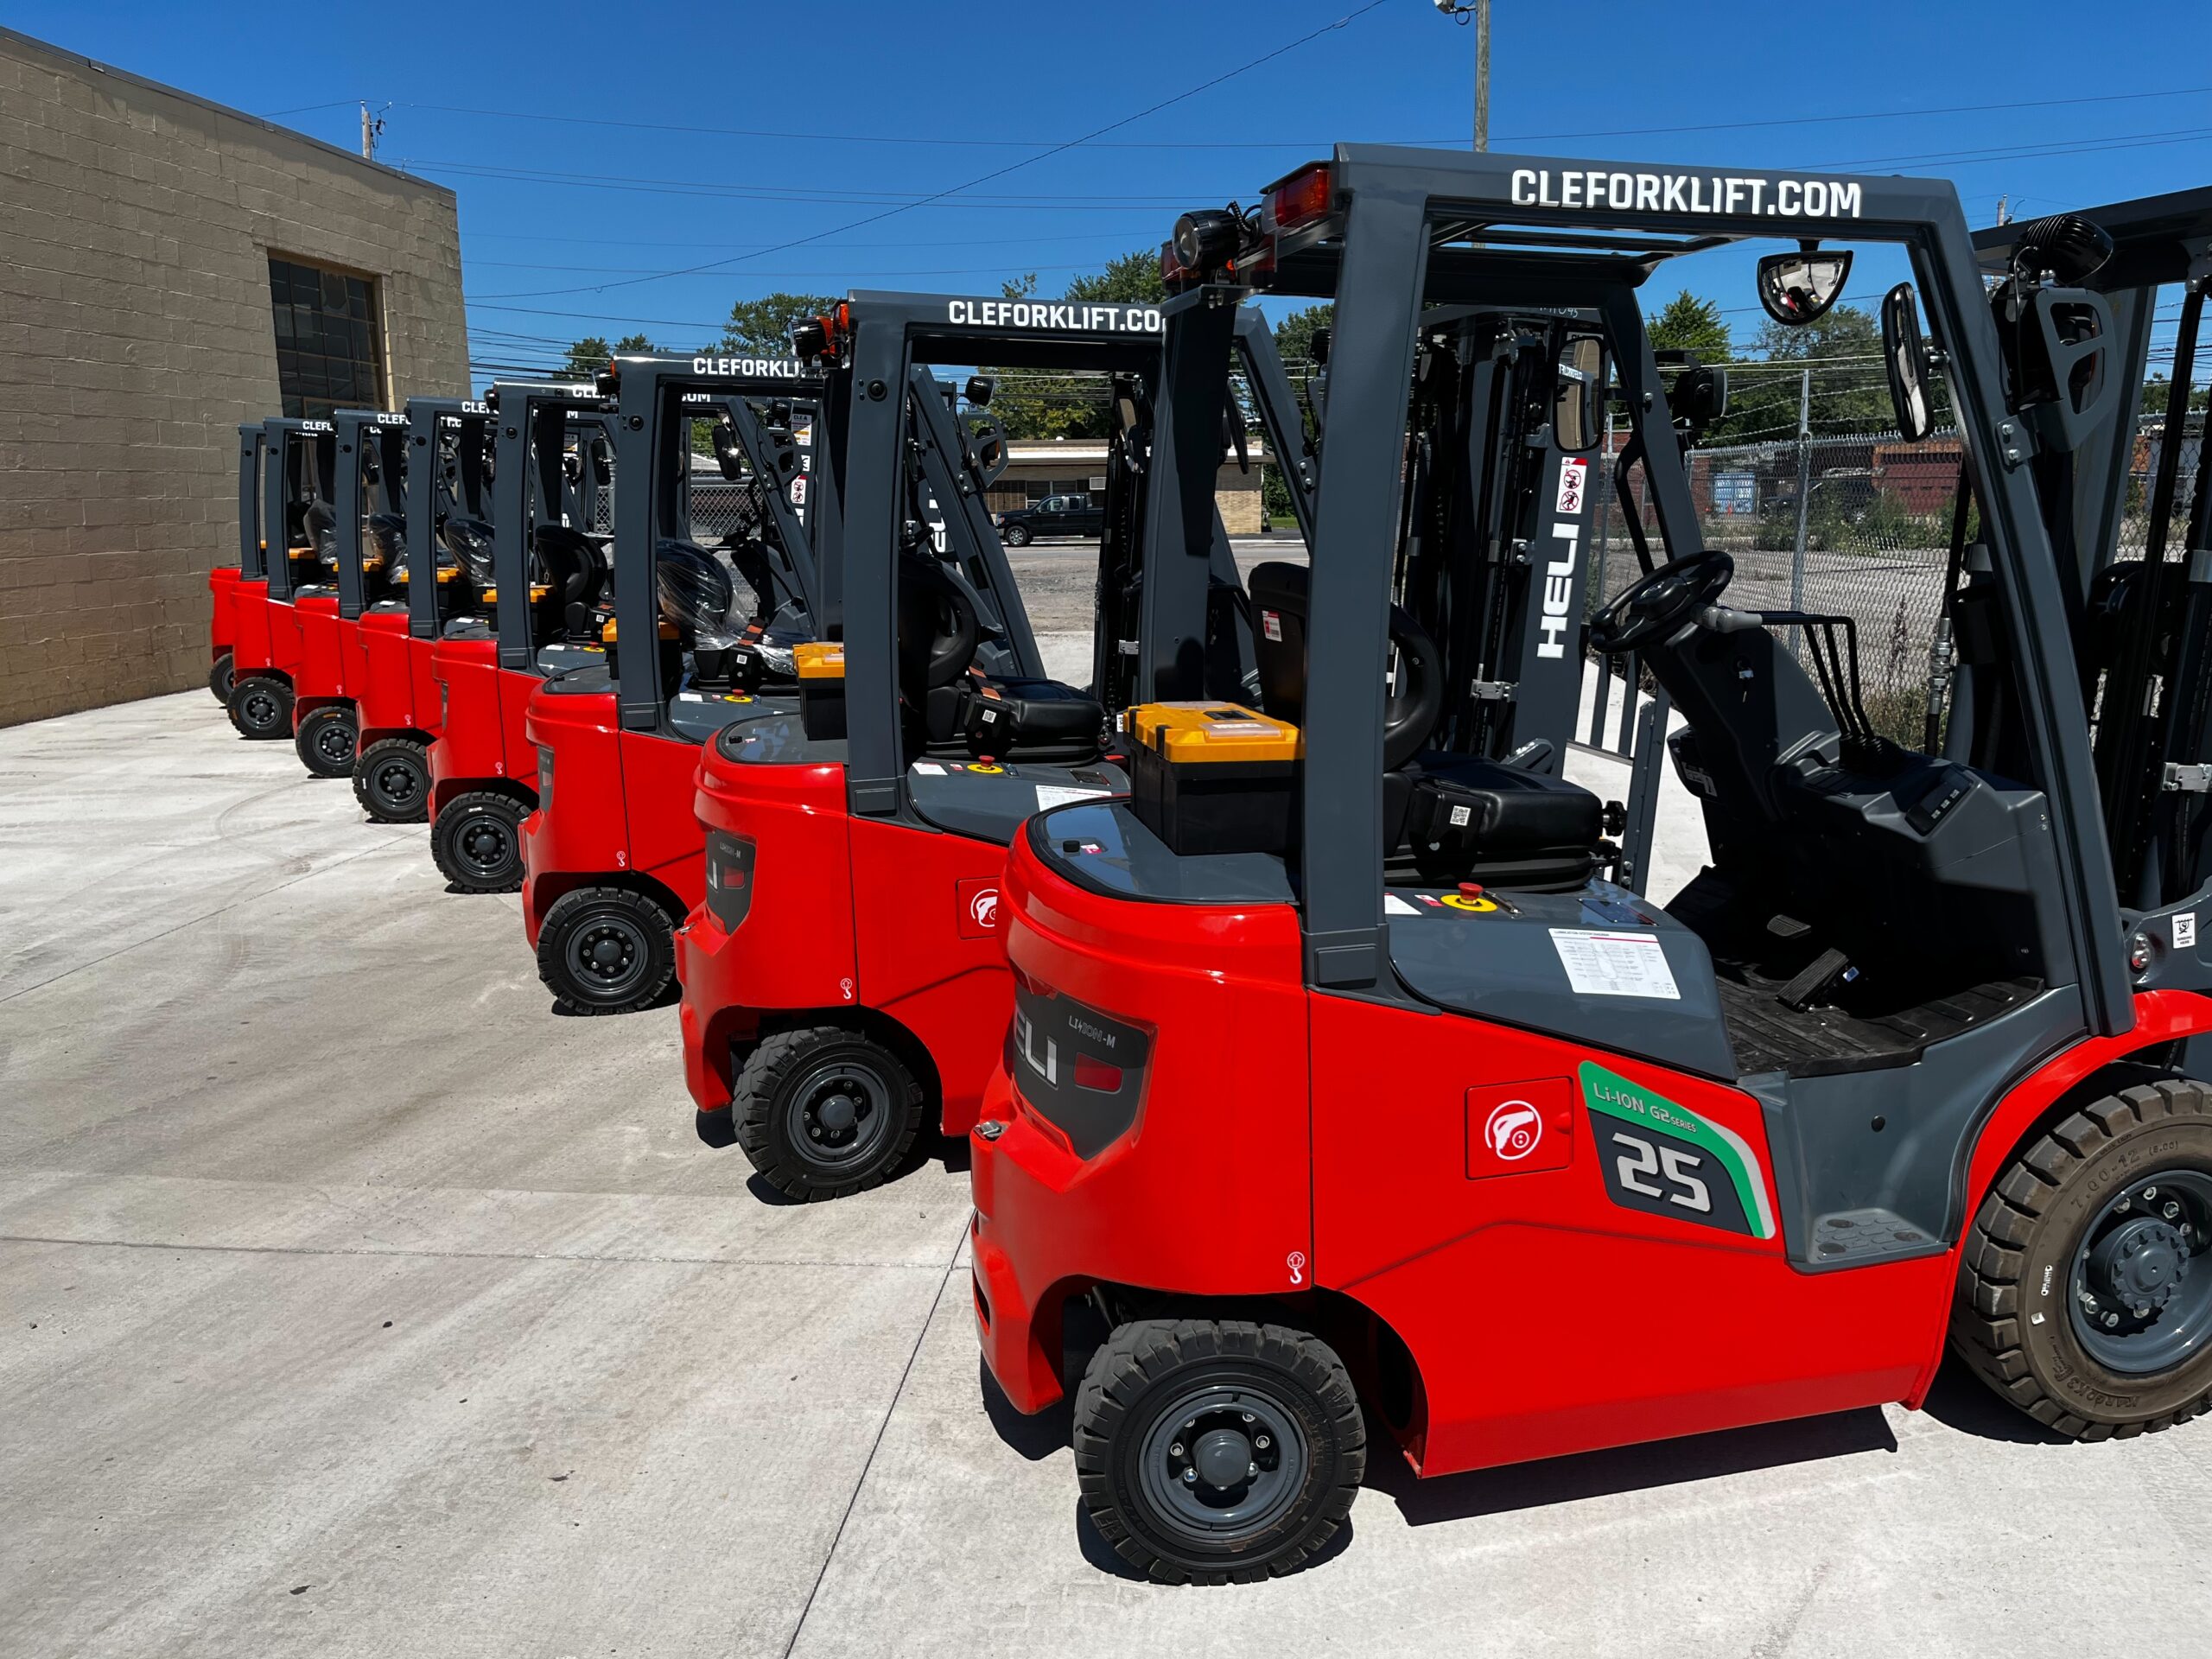 Heli CPD25-GB2Li-M Lithium Forklifts from Cleveland Forklift